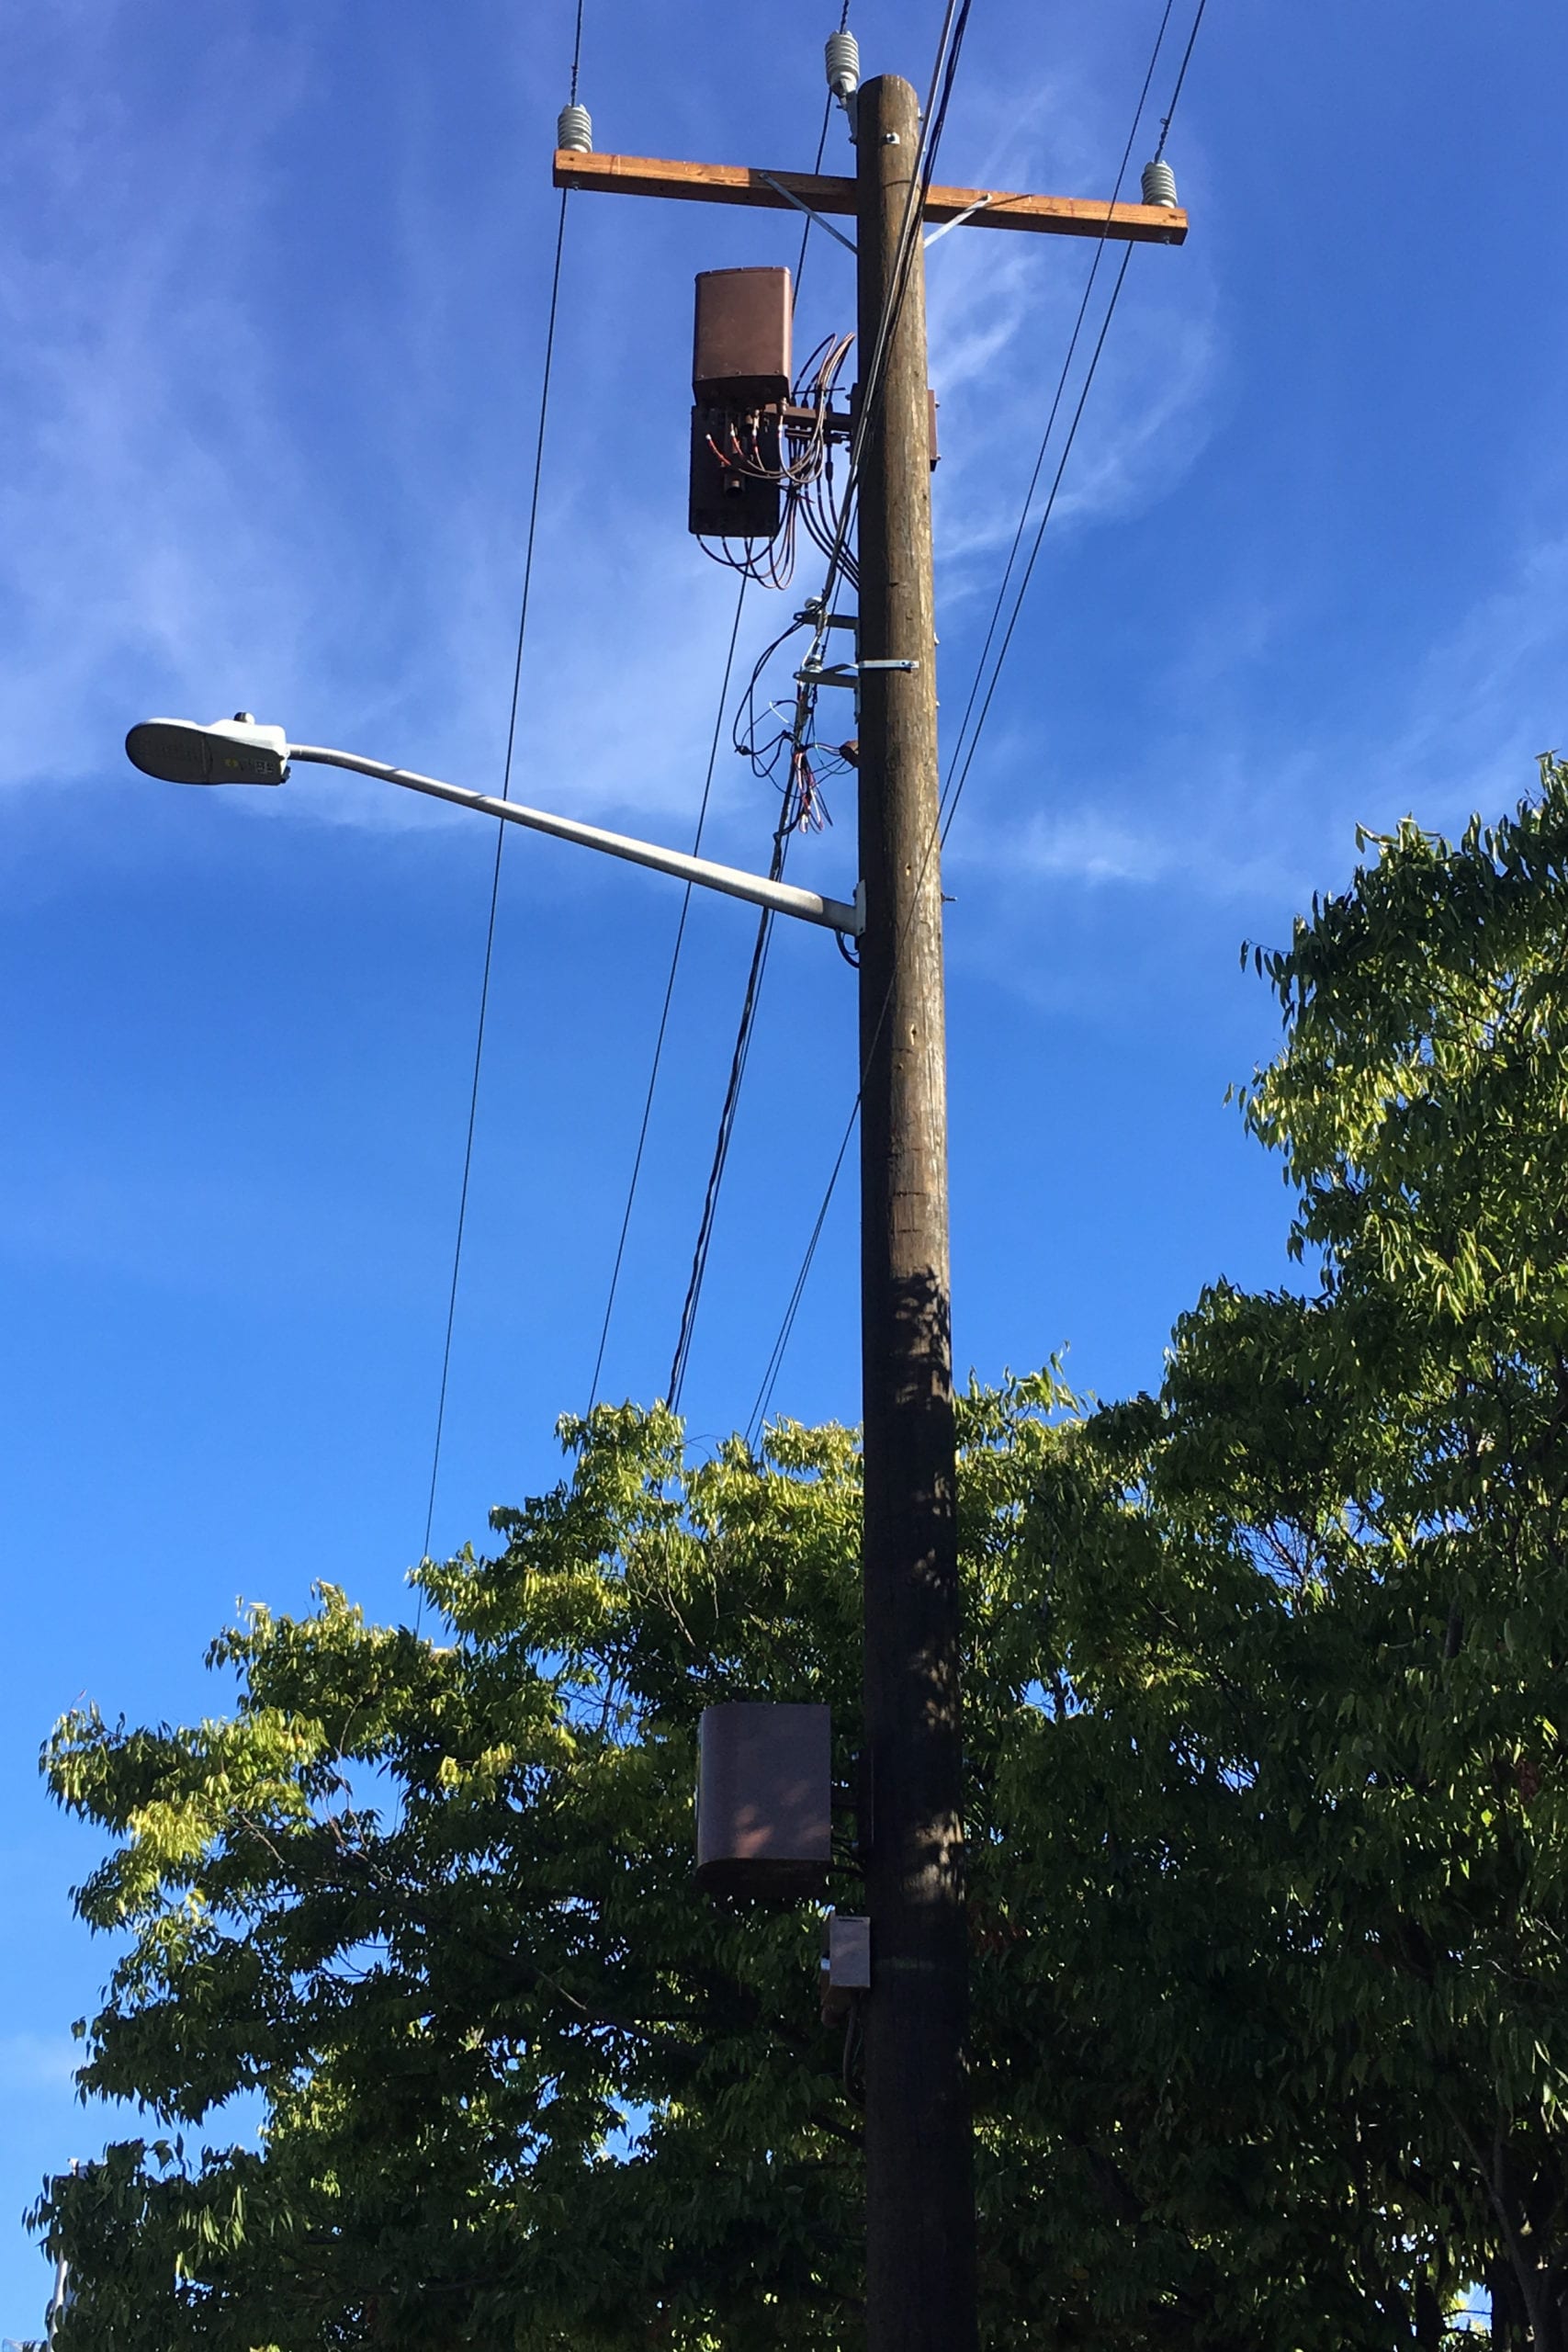 A wooden utility pole with a streetlight, overhead power lines, and a side-mounted small wireless facility between the power lines and the streetlight